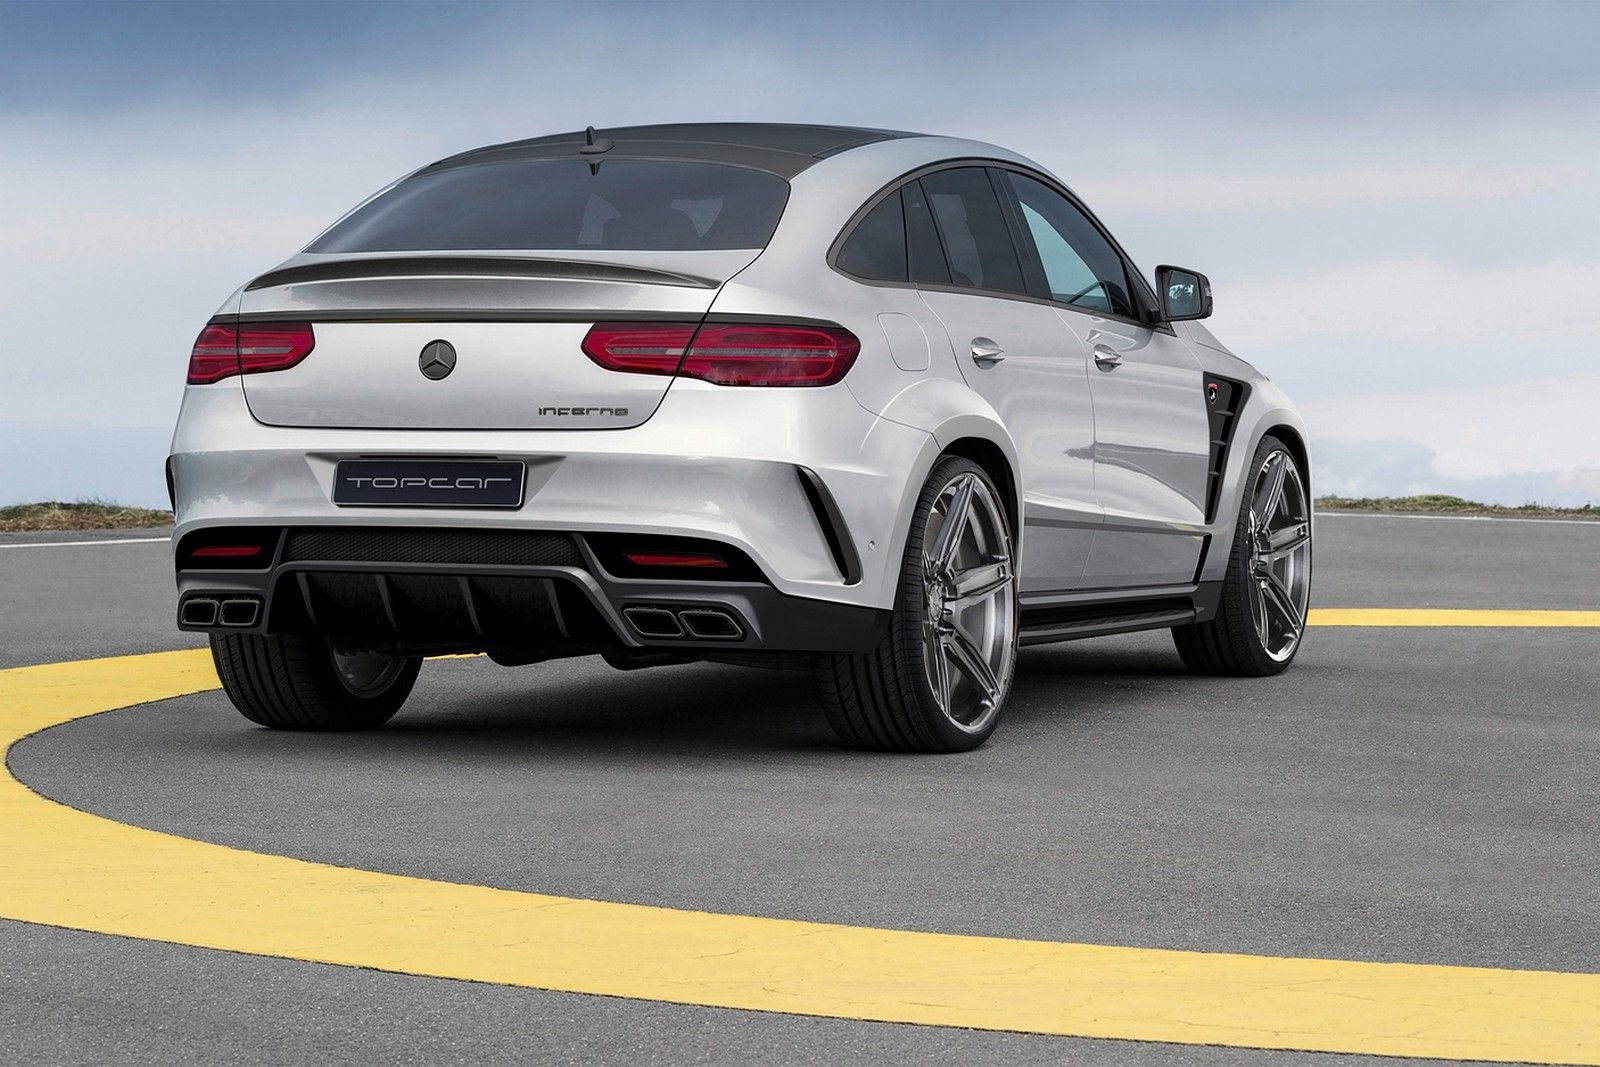 2016 Mercedes-Benz GLE Coupe Inferno By TopCar